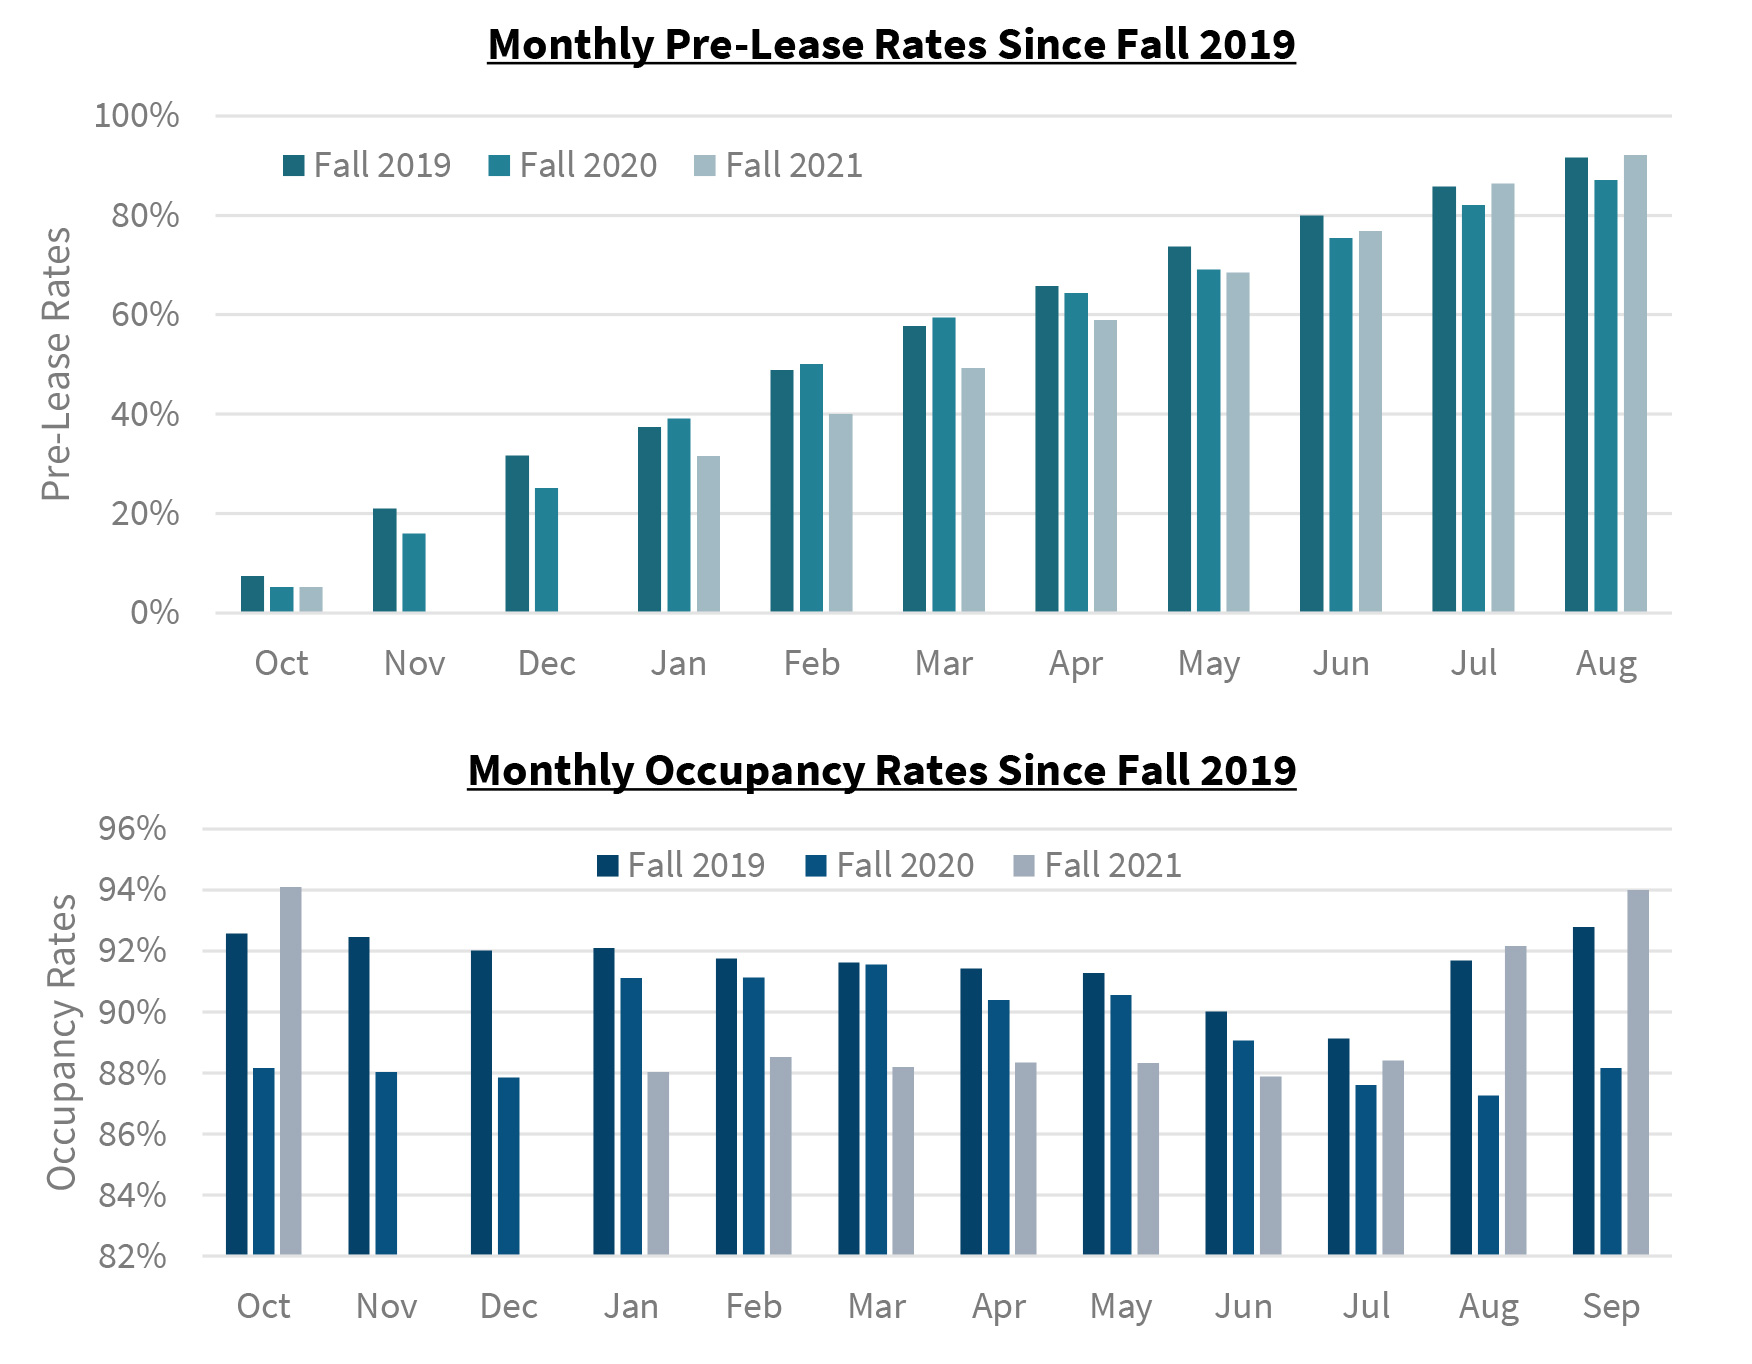 Monthly Pre-Lease Rates Since Fall 2019 | Monthly Occupancy Rates Since Fall 2019